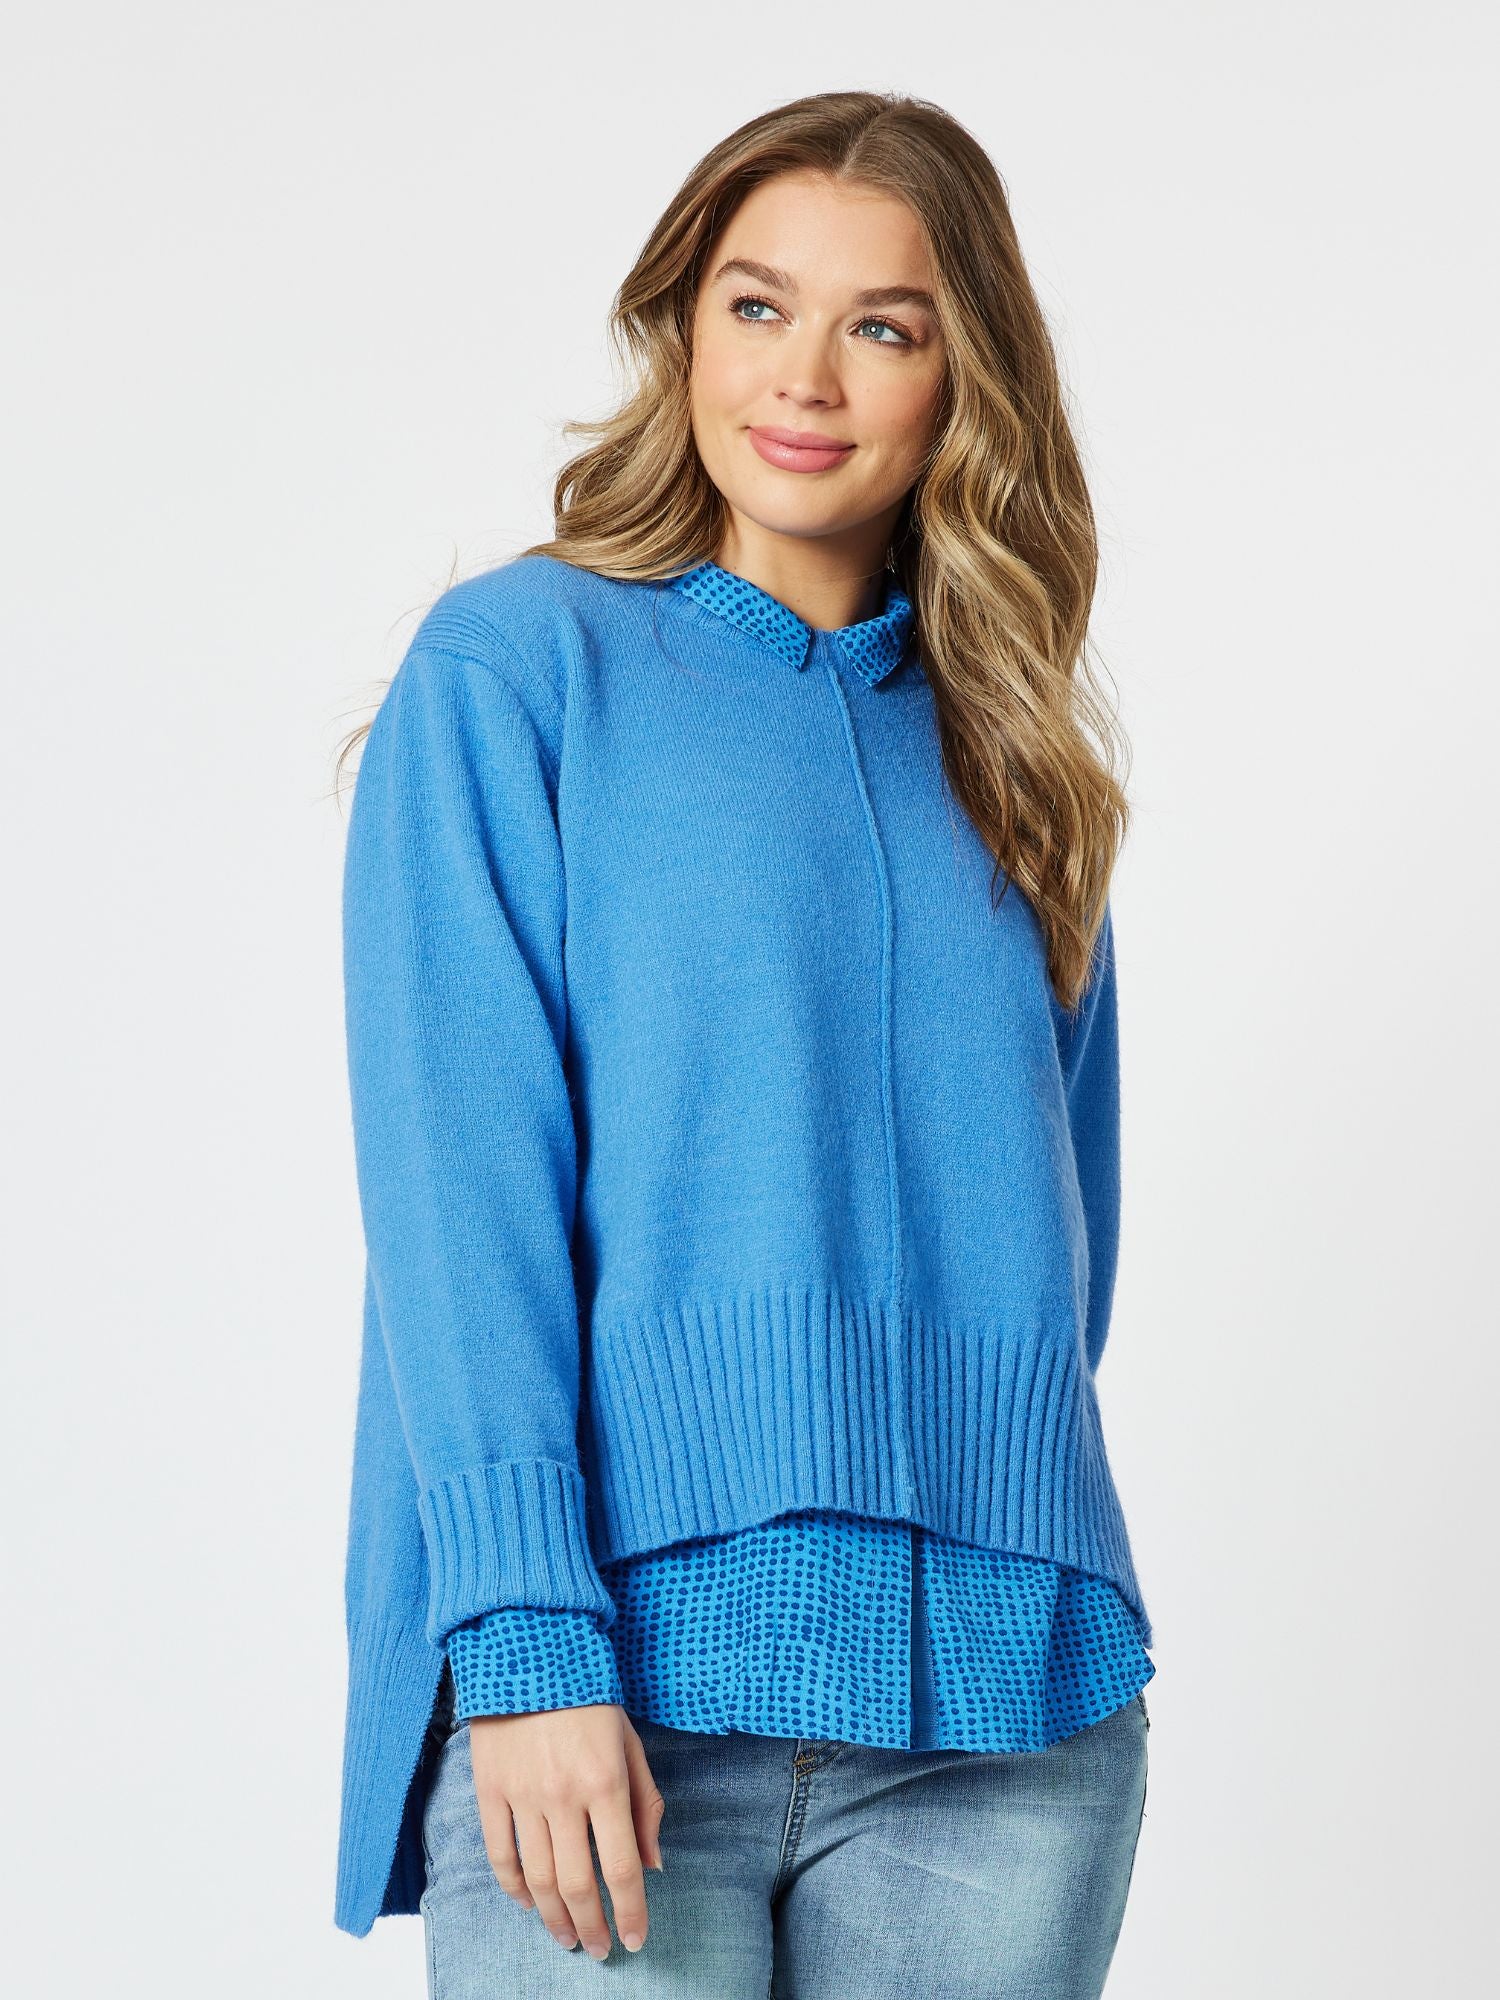 Madeline High Lo Knit Top Top - Blue